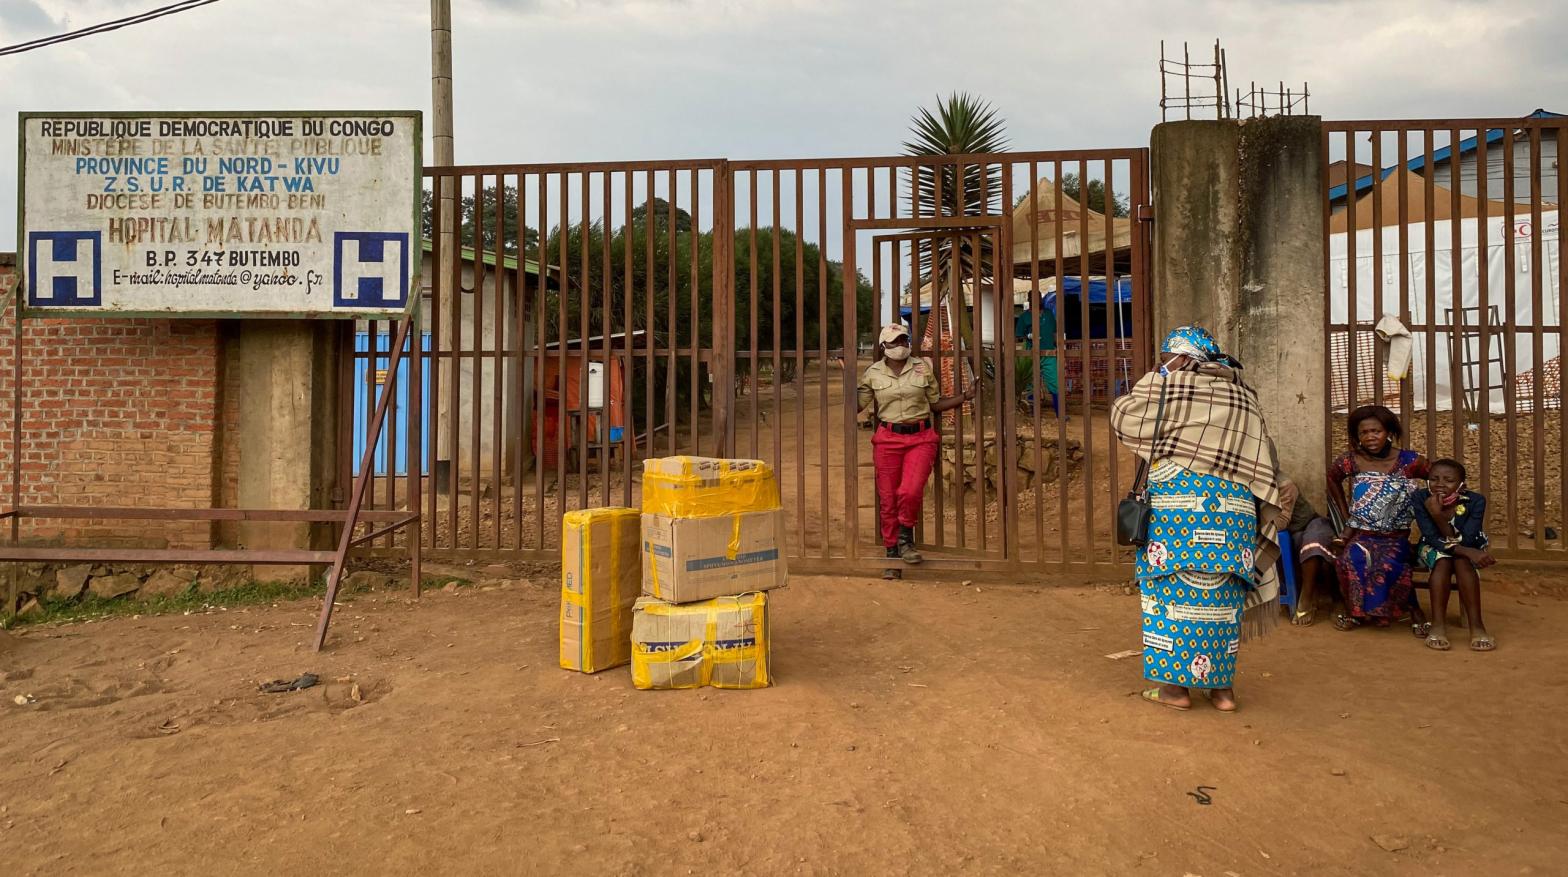 The gates of the Matanda Hospital in Butembo, found in the North Kivu province of the DRC. The hospital is where the first case of a new Ebola outbreak in the country died earlier this month.  (Photo: Al-hadji Kudra Maliro, AP)